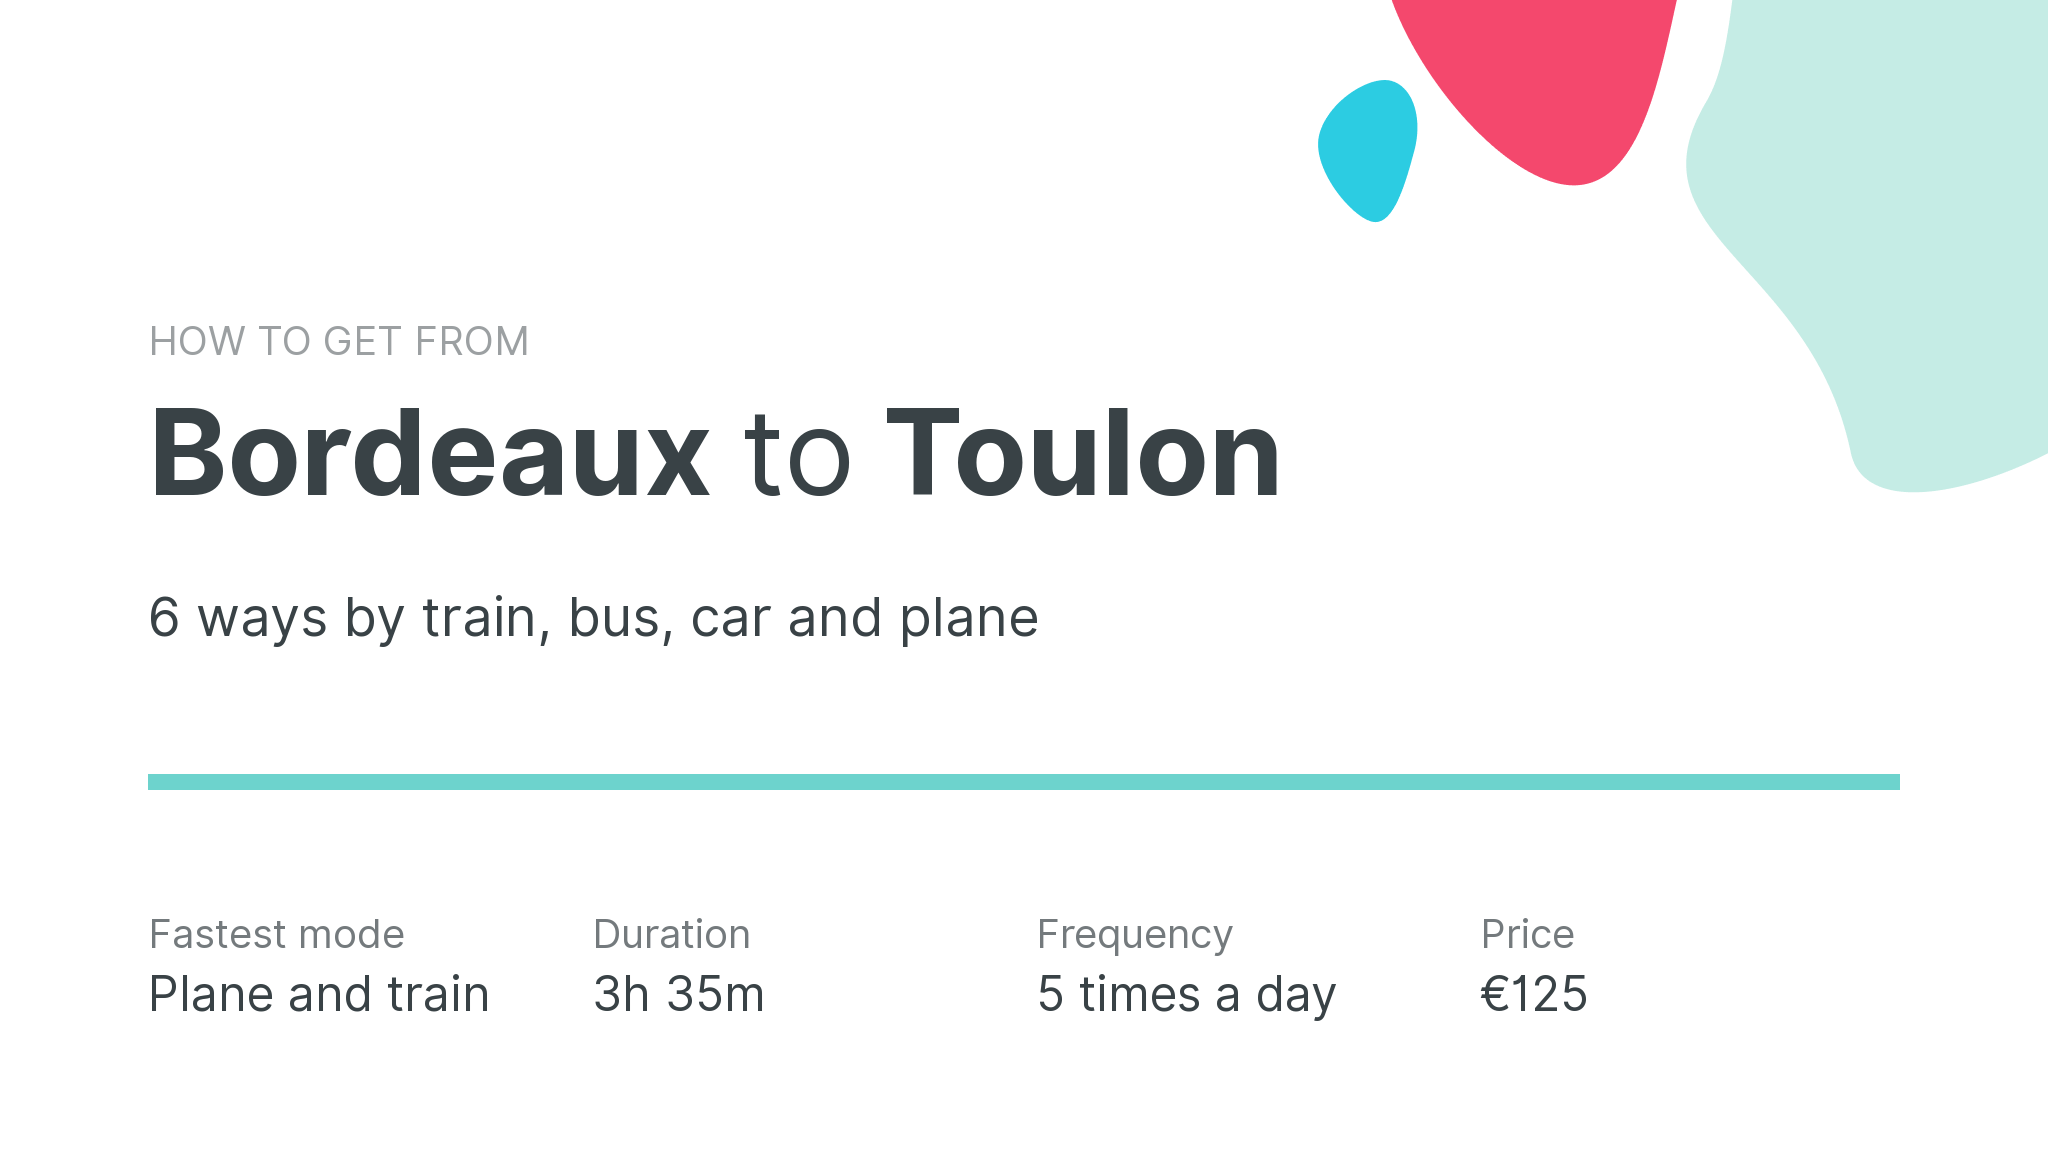 How do I get from Bordeaux to Toulon